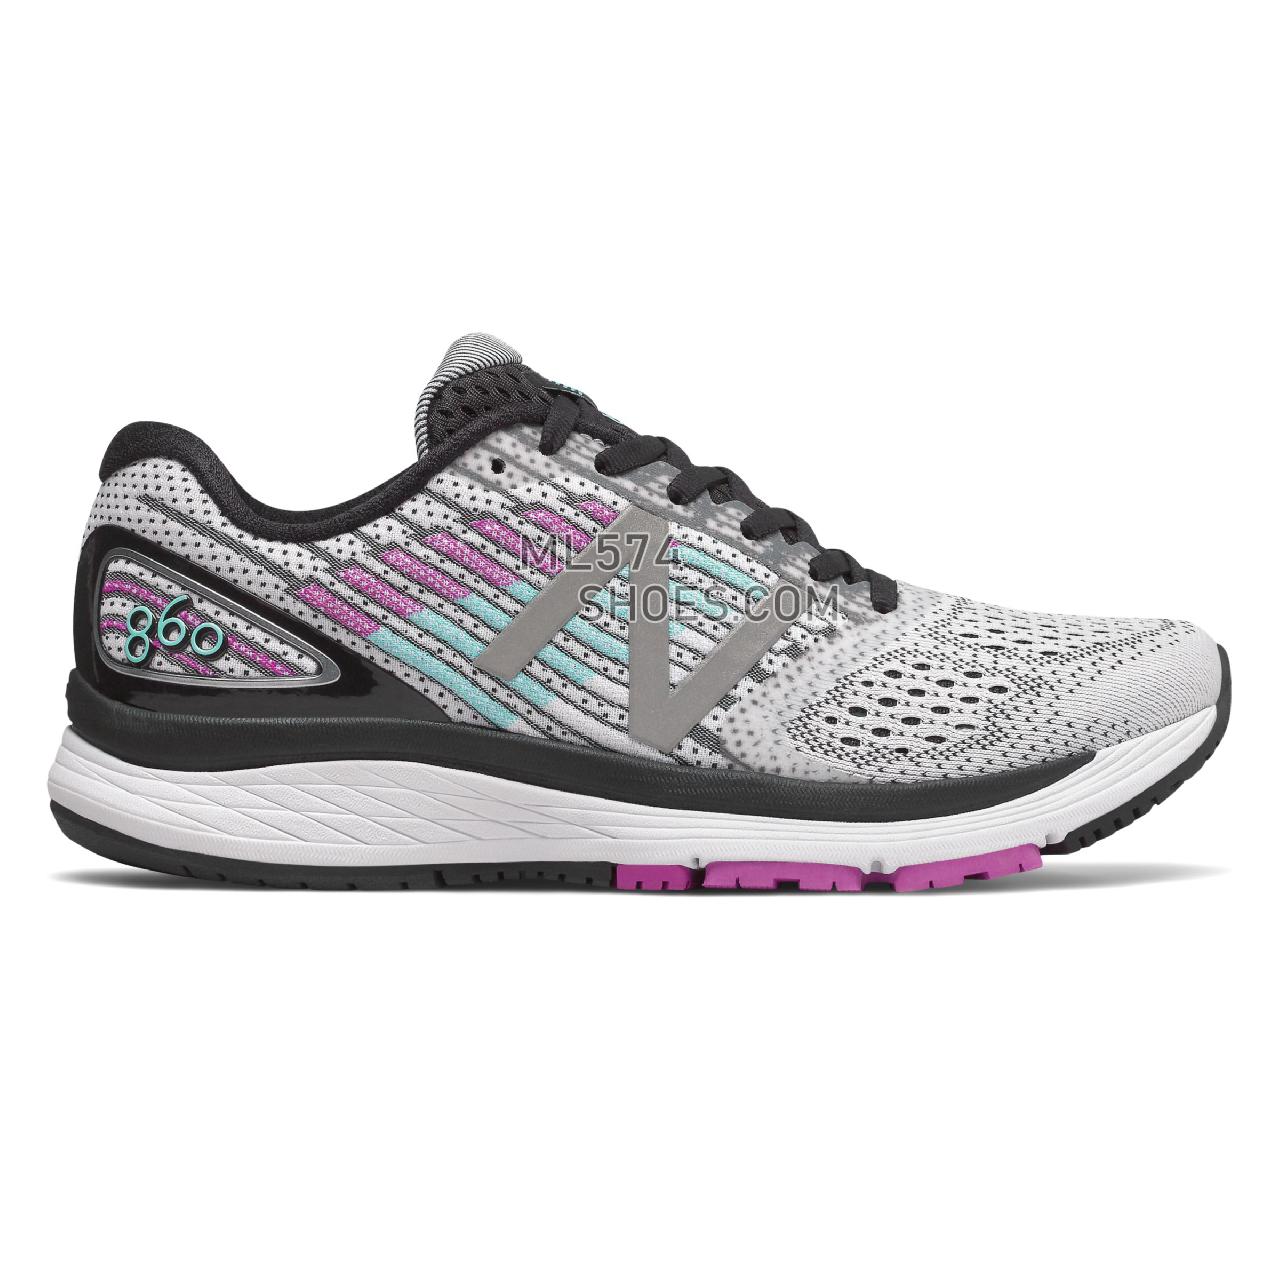 New Balance 860v9 - Women's 860 - Running White with Voltage Violet and Black - W860WP9